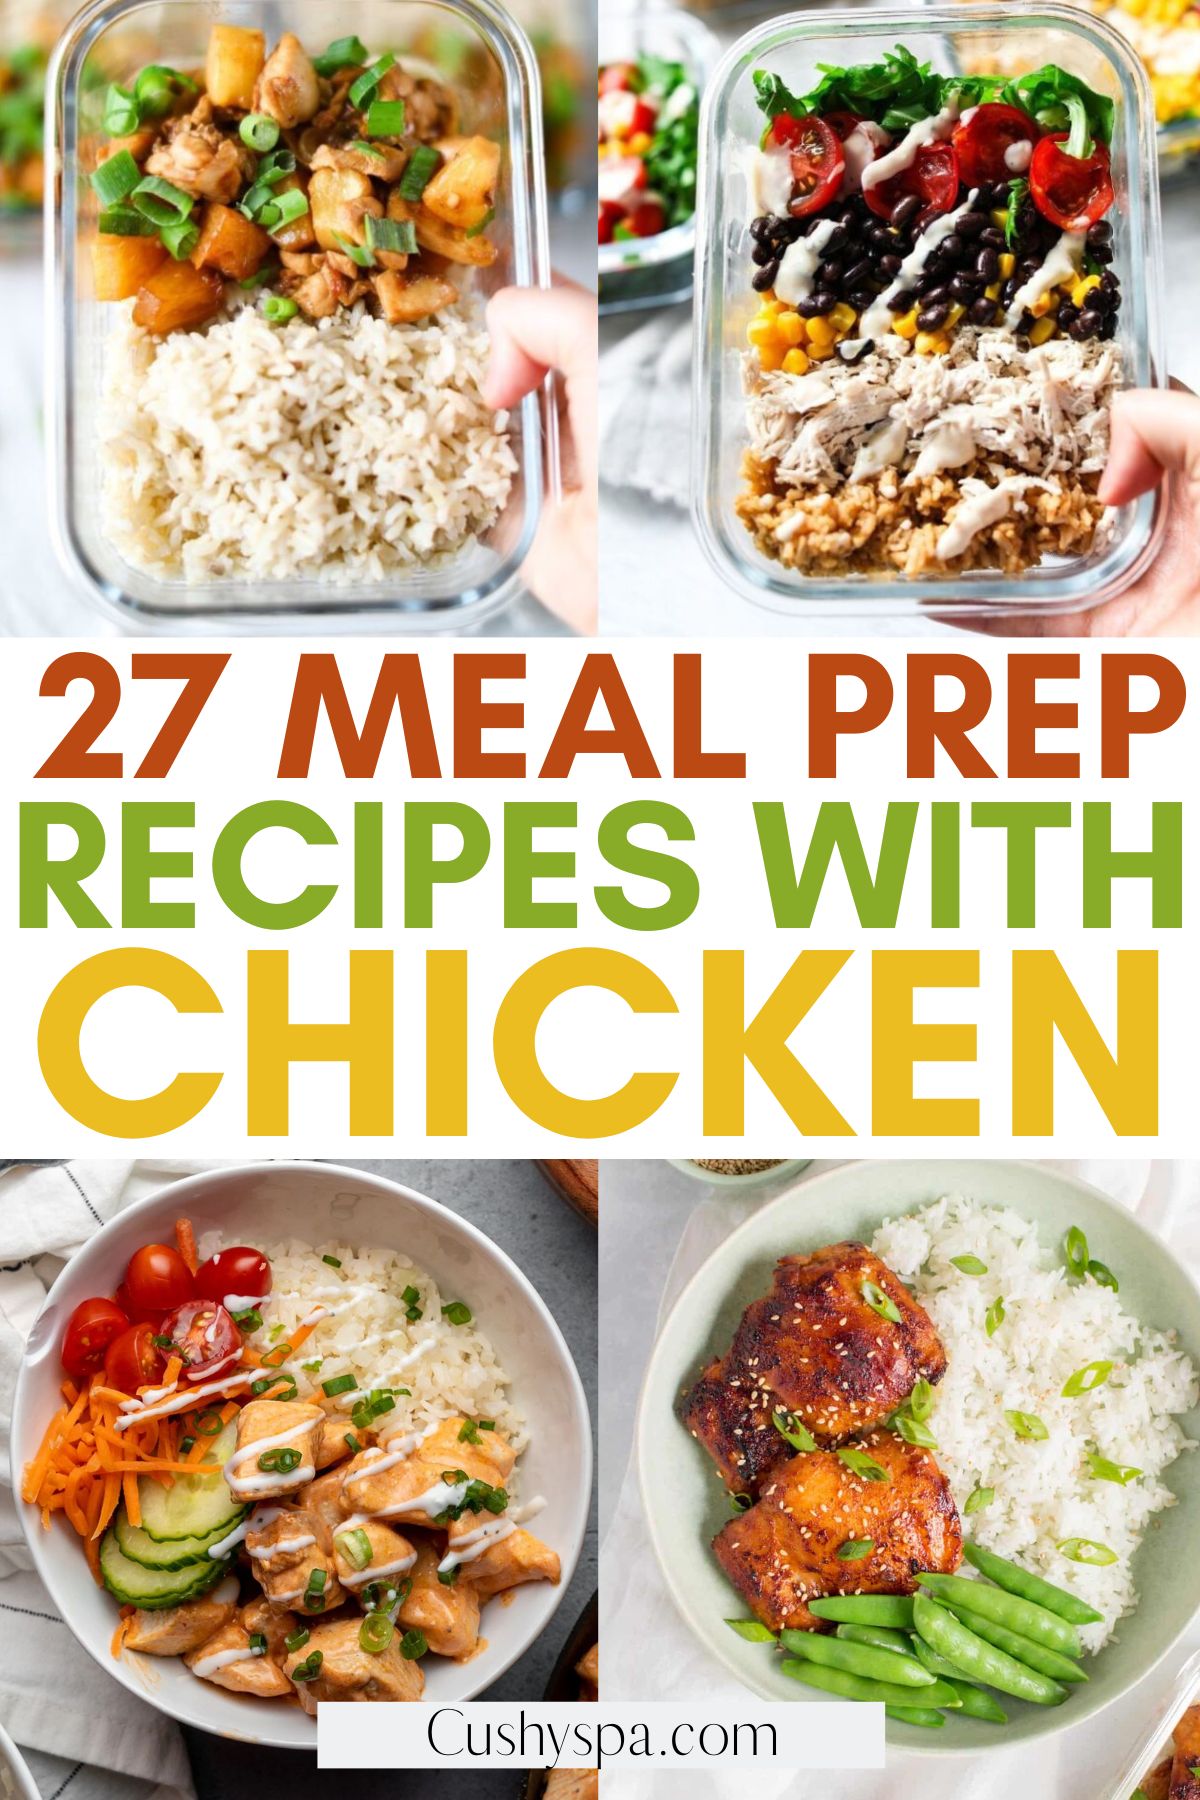 Meal Prep Recipes with Chicken